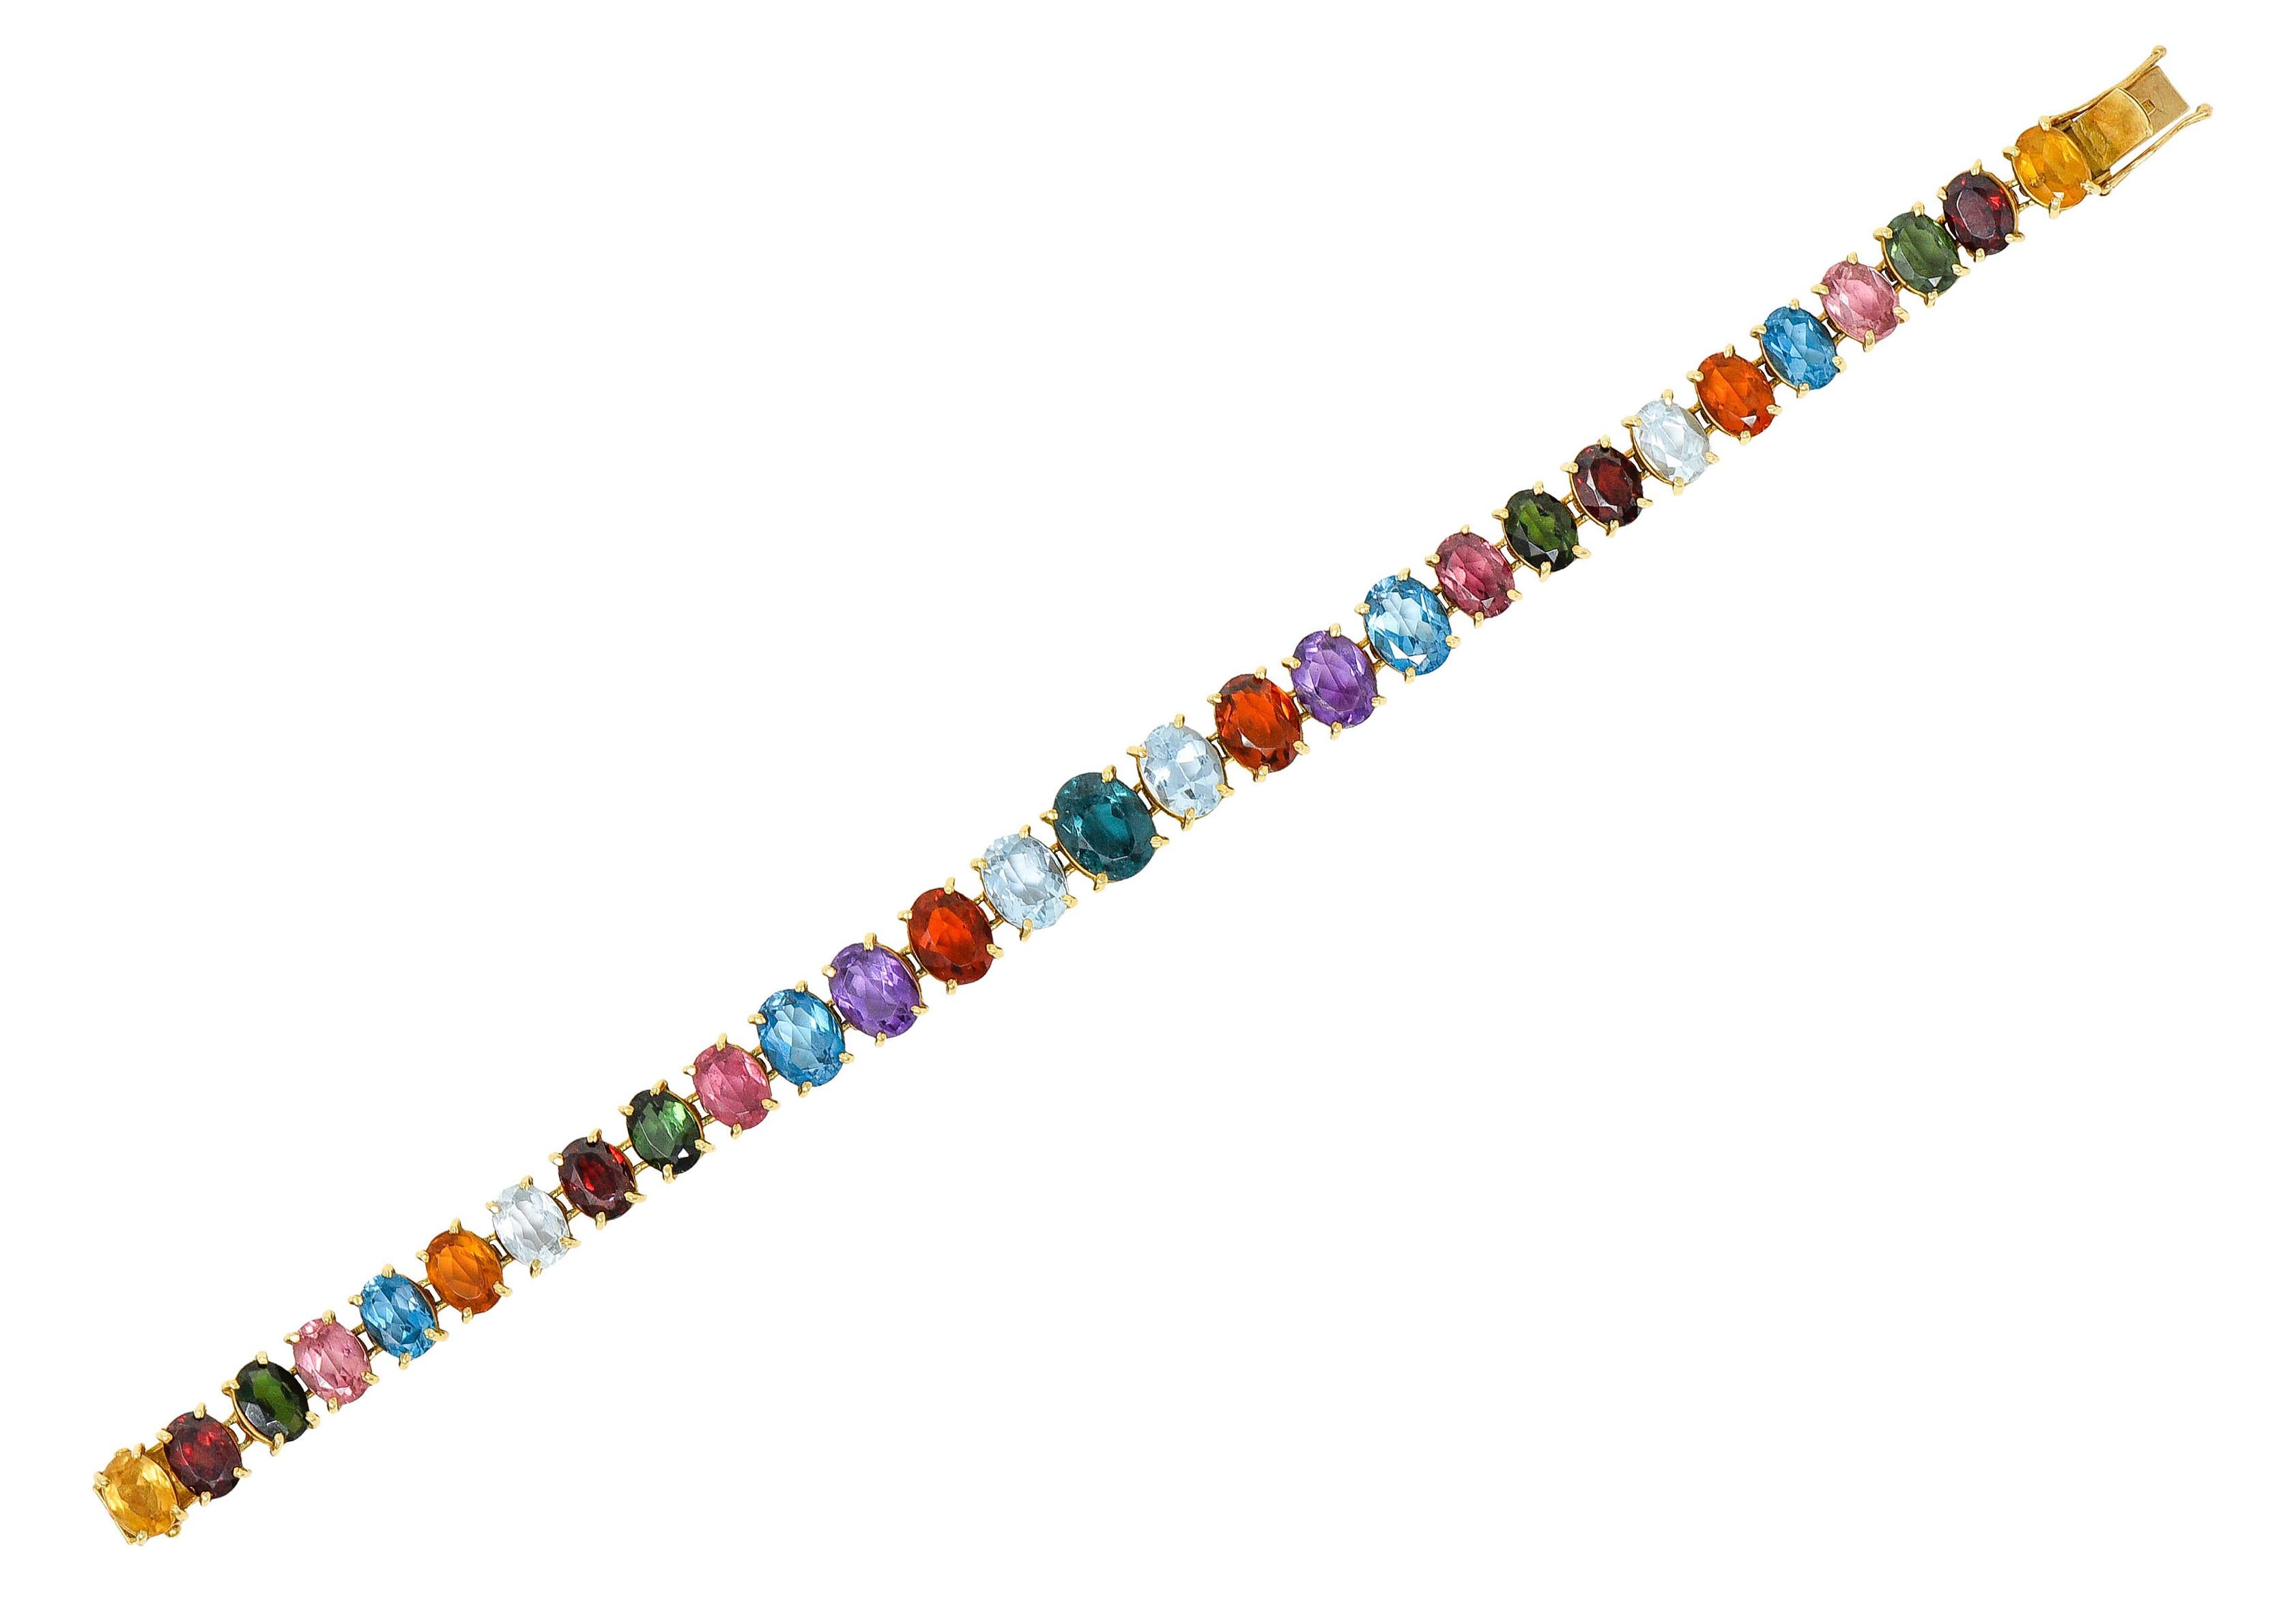 Bracelet features aquamarine, blue topaz, citrine, amethyst, green tourmaline, spinel, and others

Gemstones slightly graduate and are oval cut - ranging in size from 7.0 x 5.0 mm to 9.0 x 7.0 mm

Gemstones are well matched in hue and saturation -